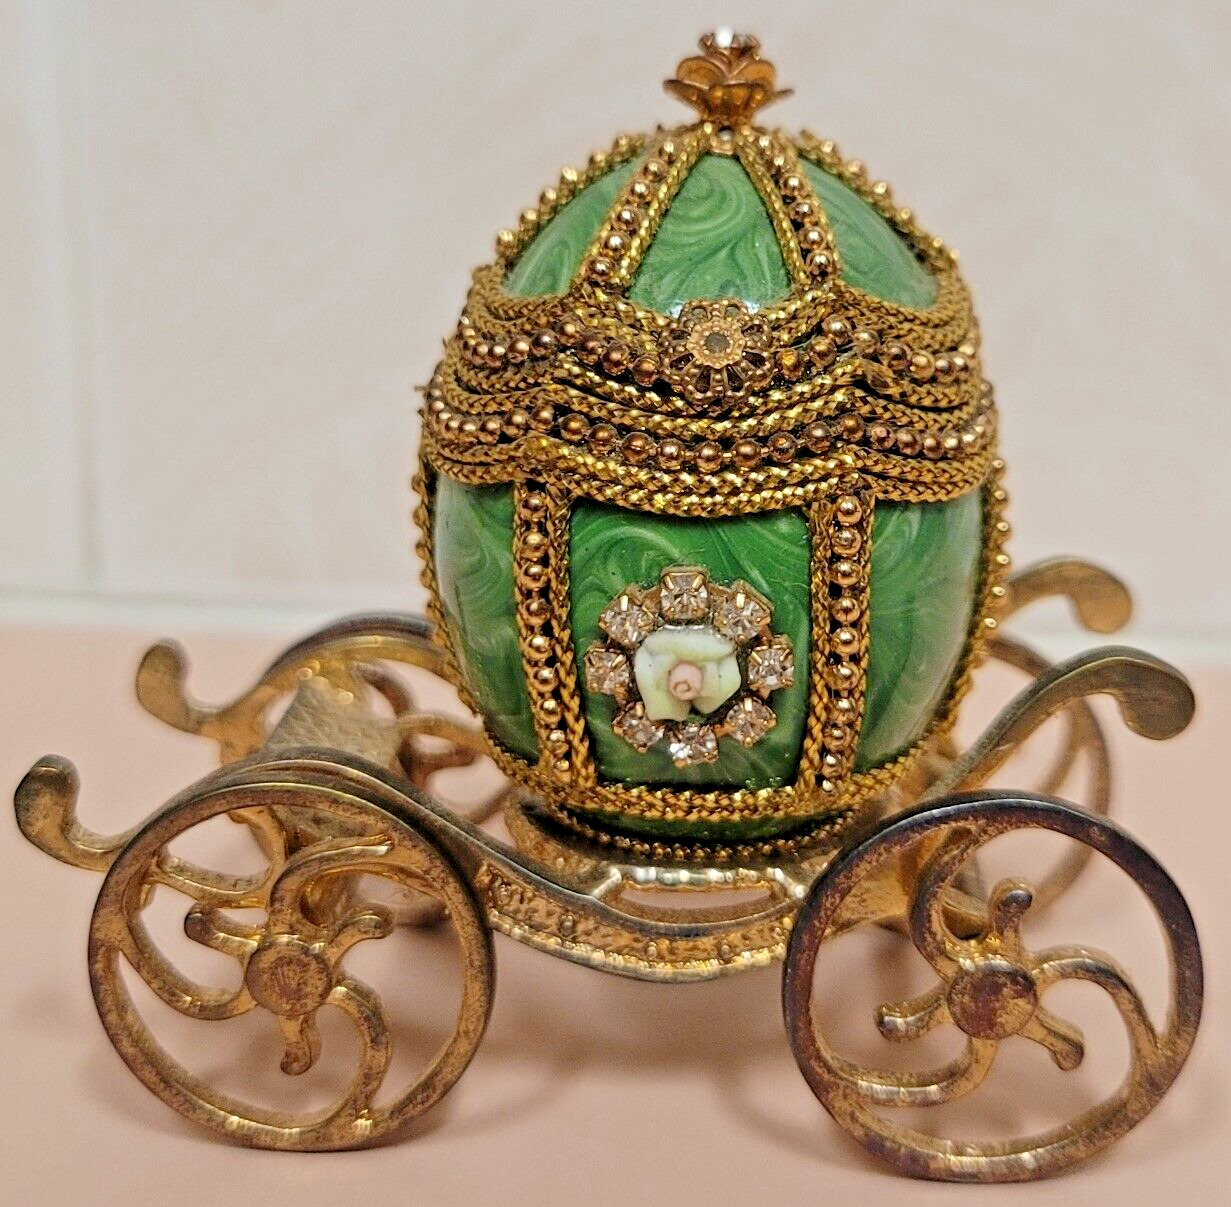 Rare Emerald Green Cinderella Carriage Engagement Ring Holder Trinket Box 2.5-in